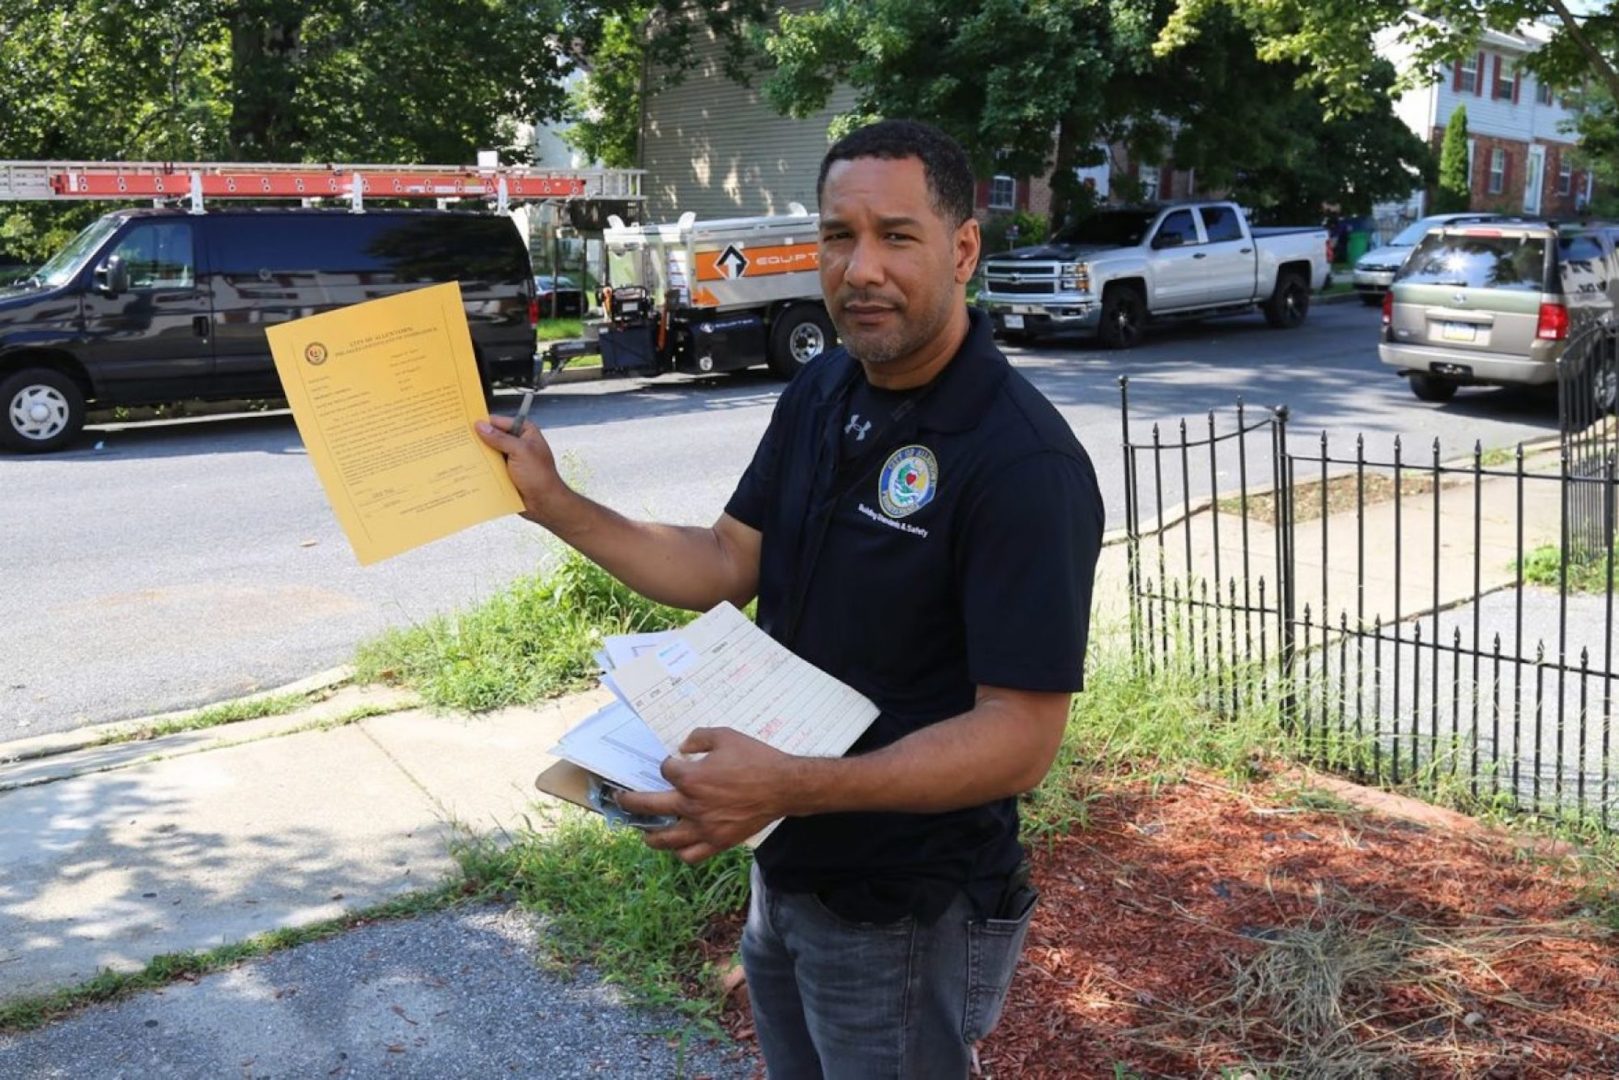 Allentown Housing Inspector Modesto Medina shows an example of the certificate property owners receive when their building passes inspection. At this location in the city's southern neighborhoods, Medina noted a discarded car wheel and other debris amid high weeds and grass, but the owner did not show up for the scheduled inspection.